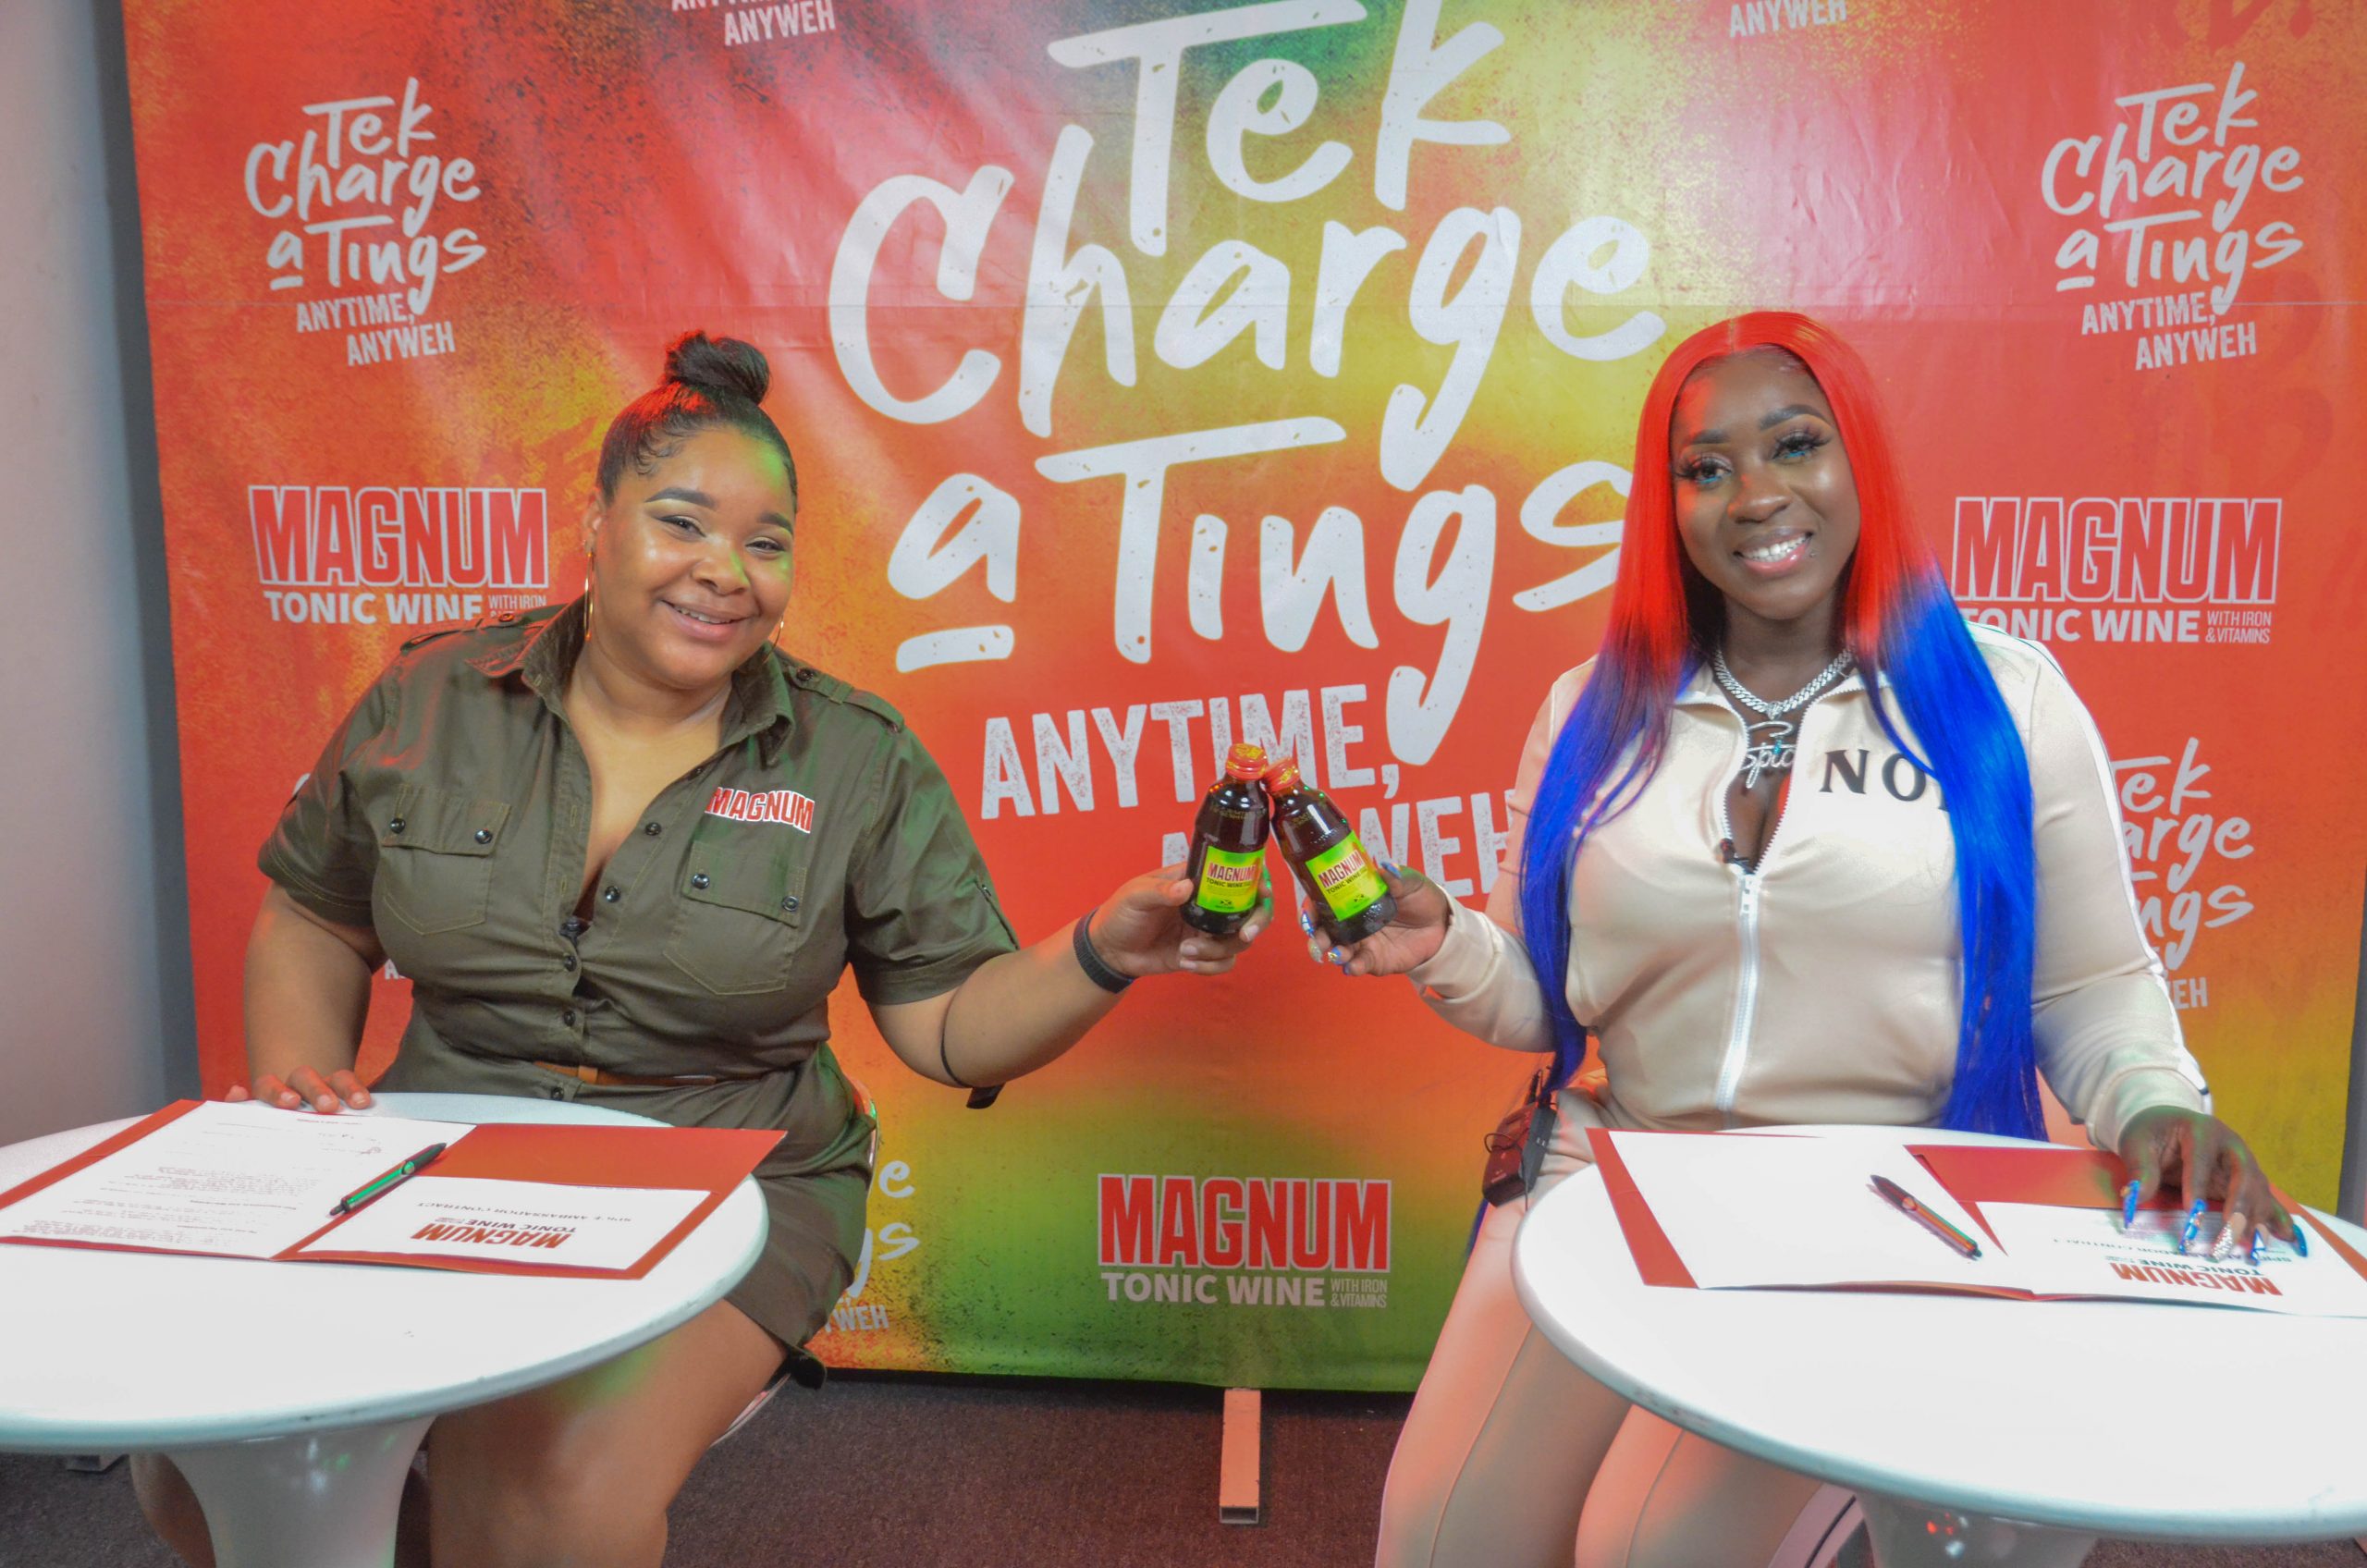 Spice renews partnership with Magnum and launches million dollars dance challenge